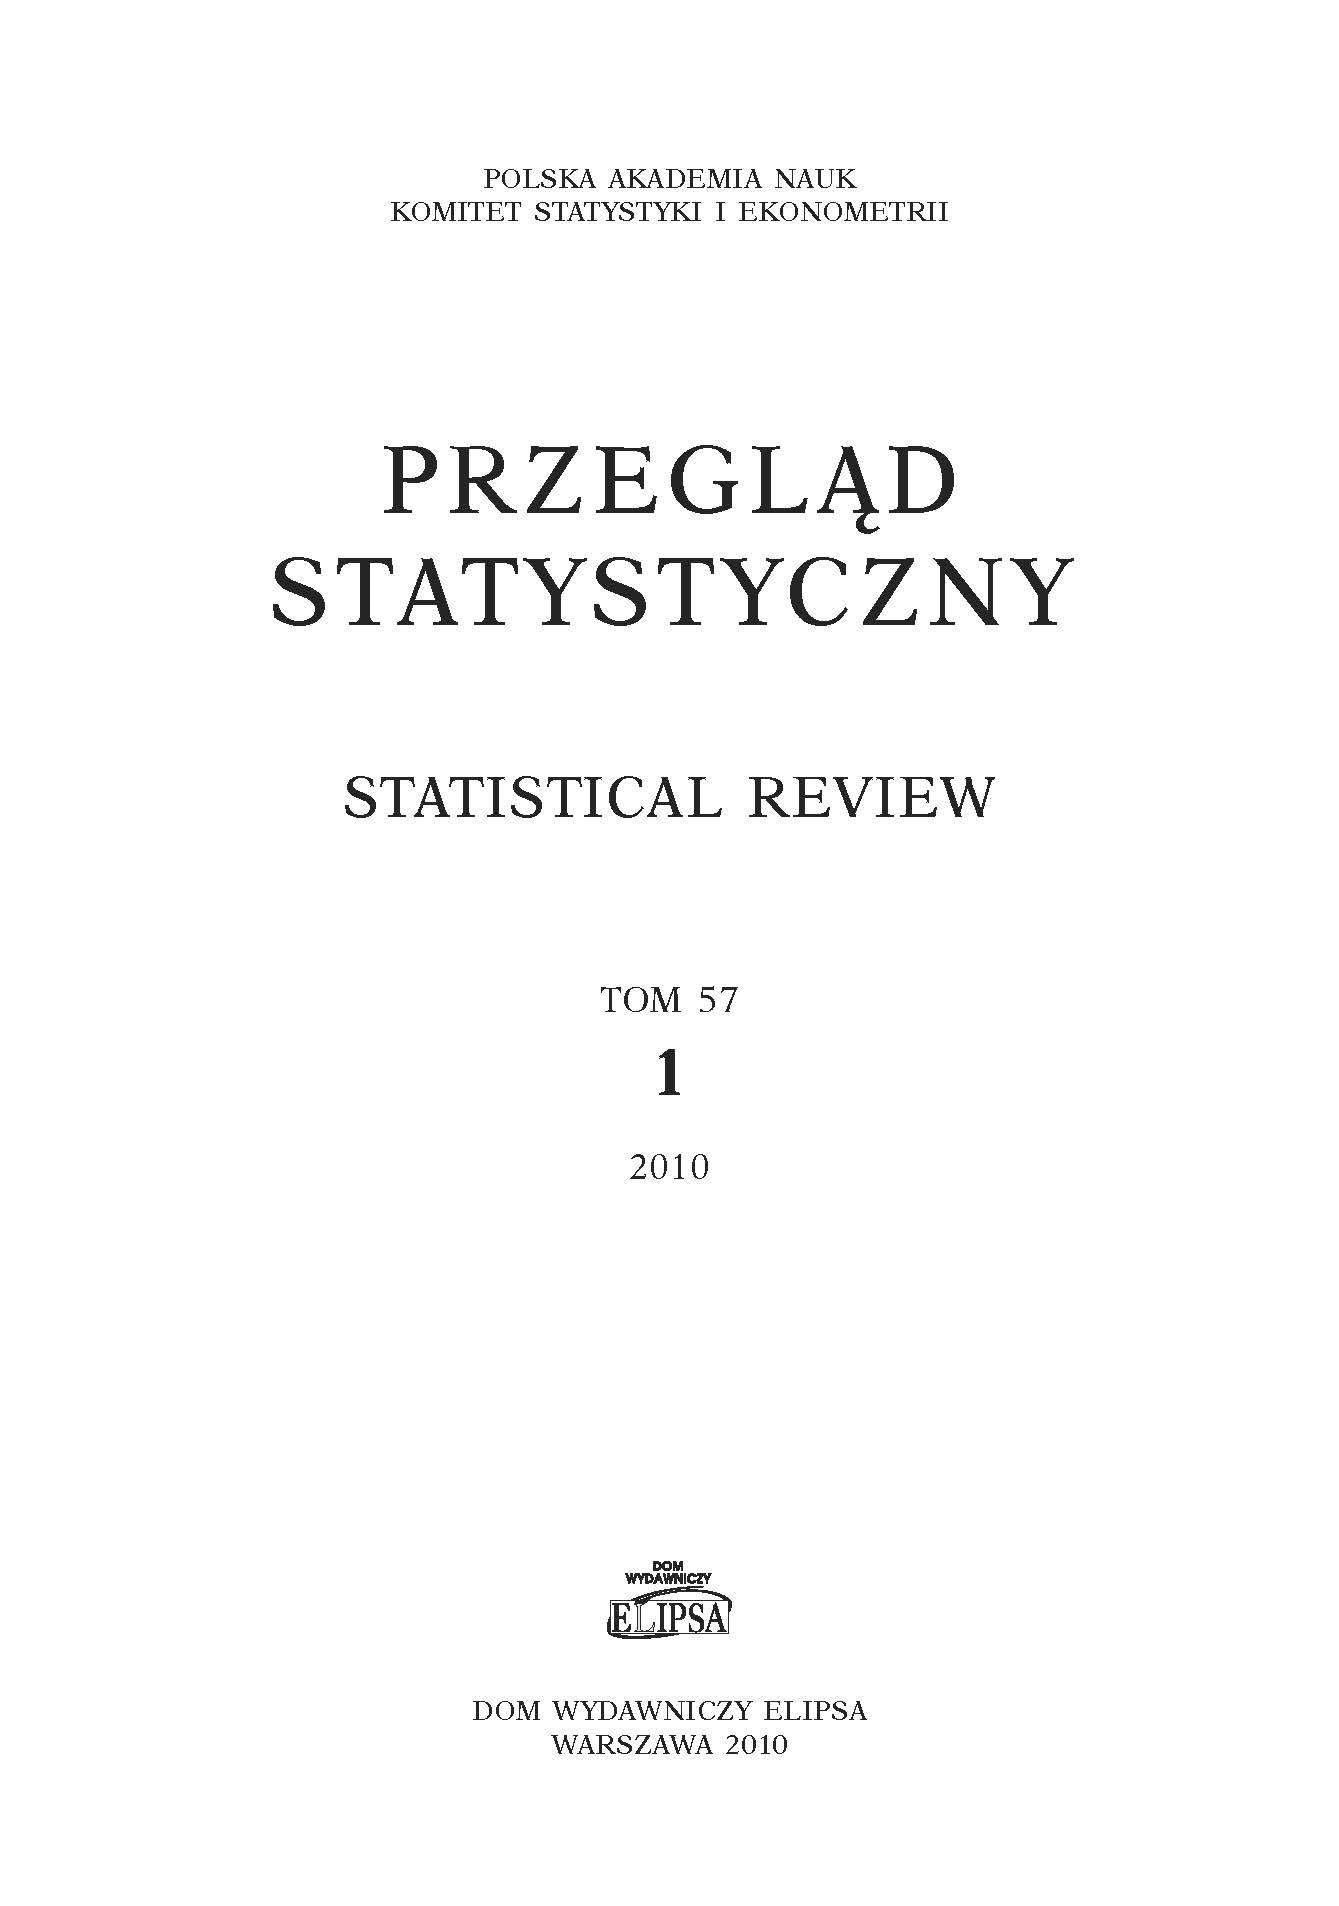 Employment and Economic Growth in Theory and in Reality of Polish the Economy Cover Image